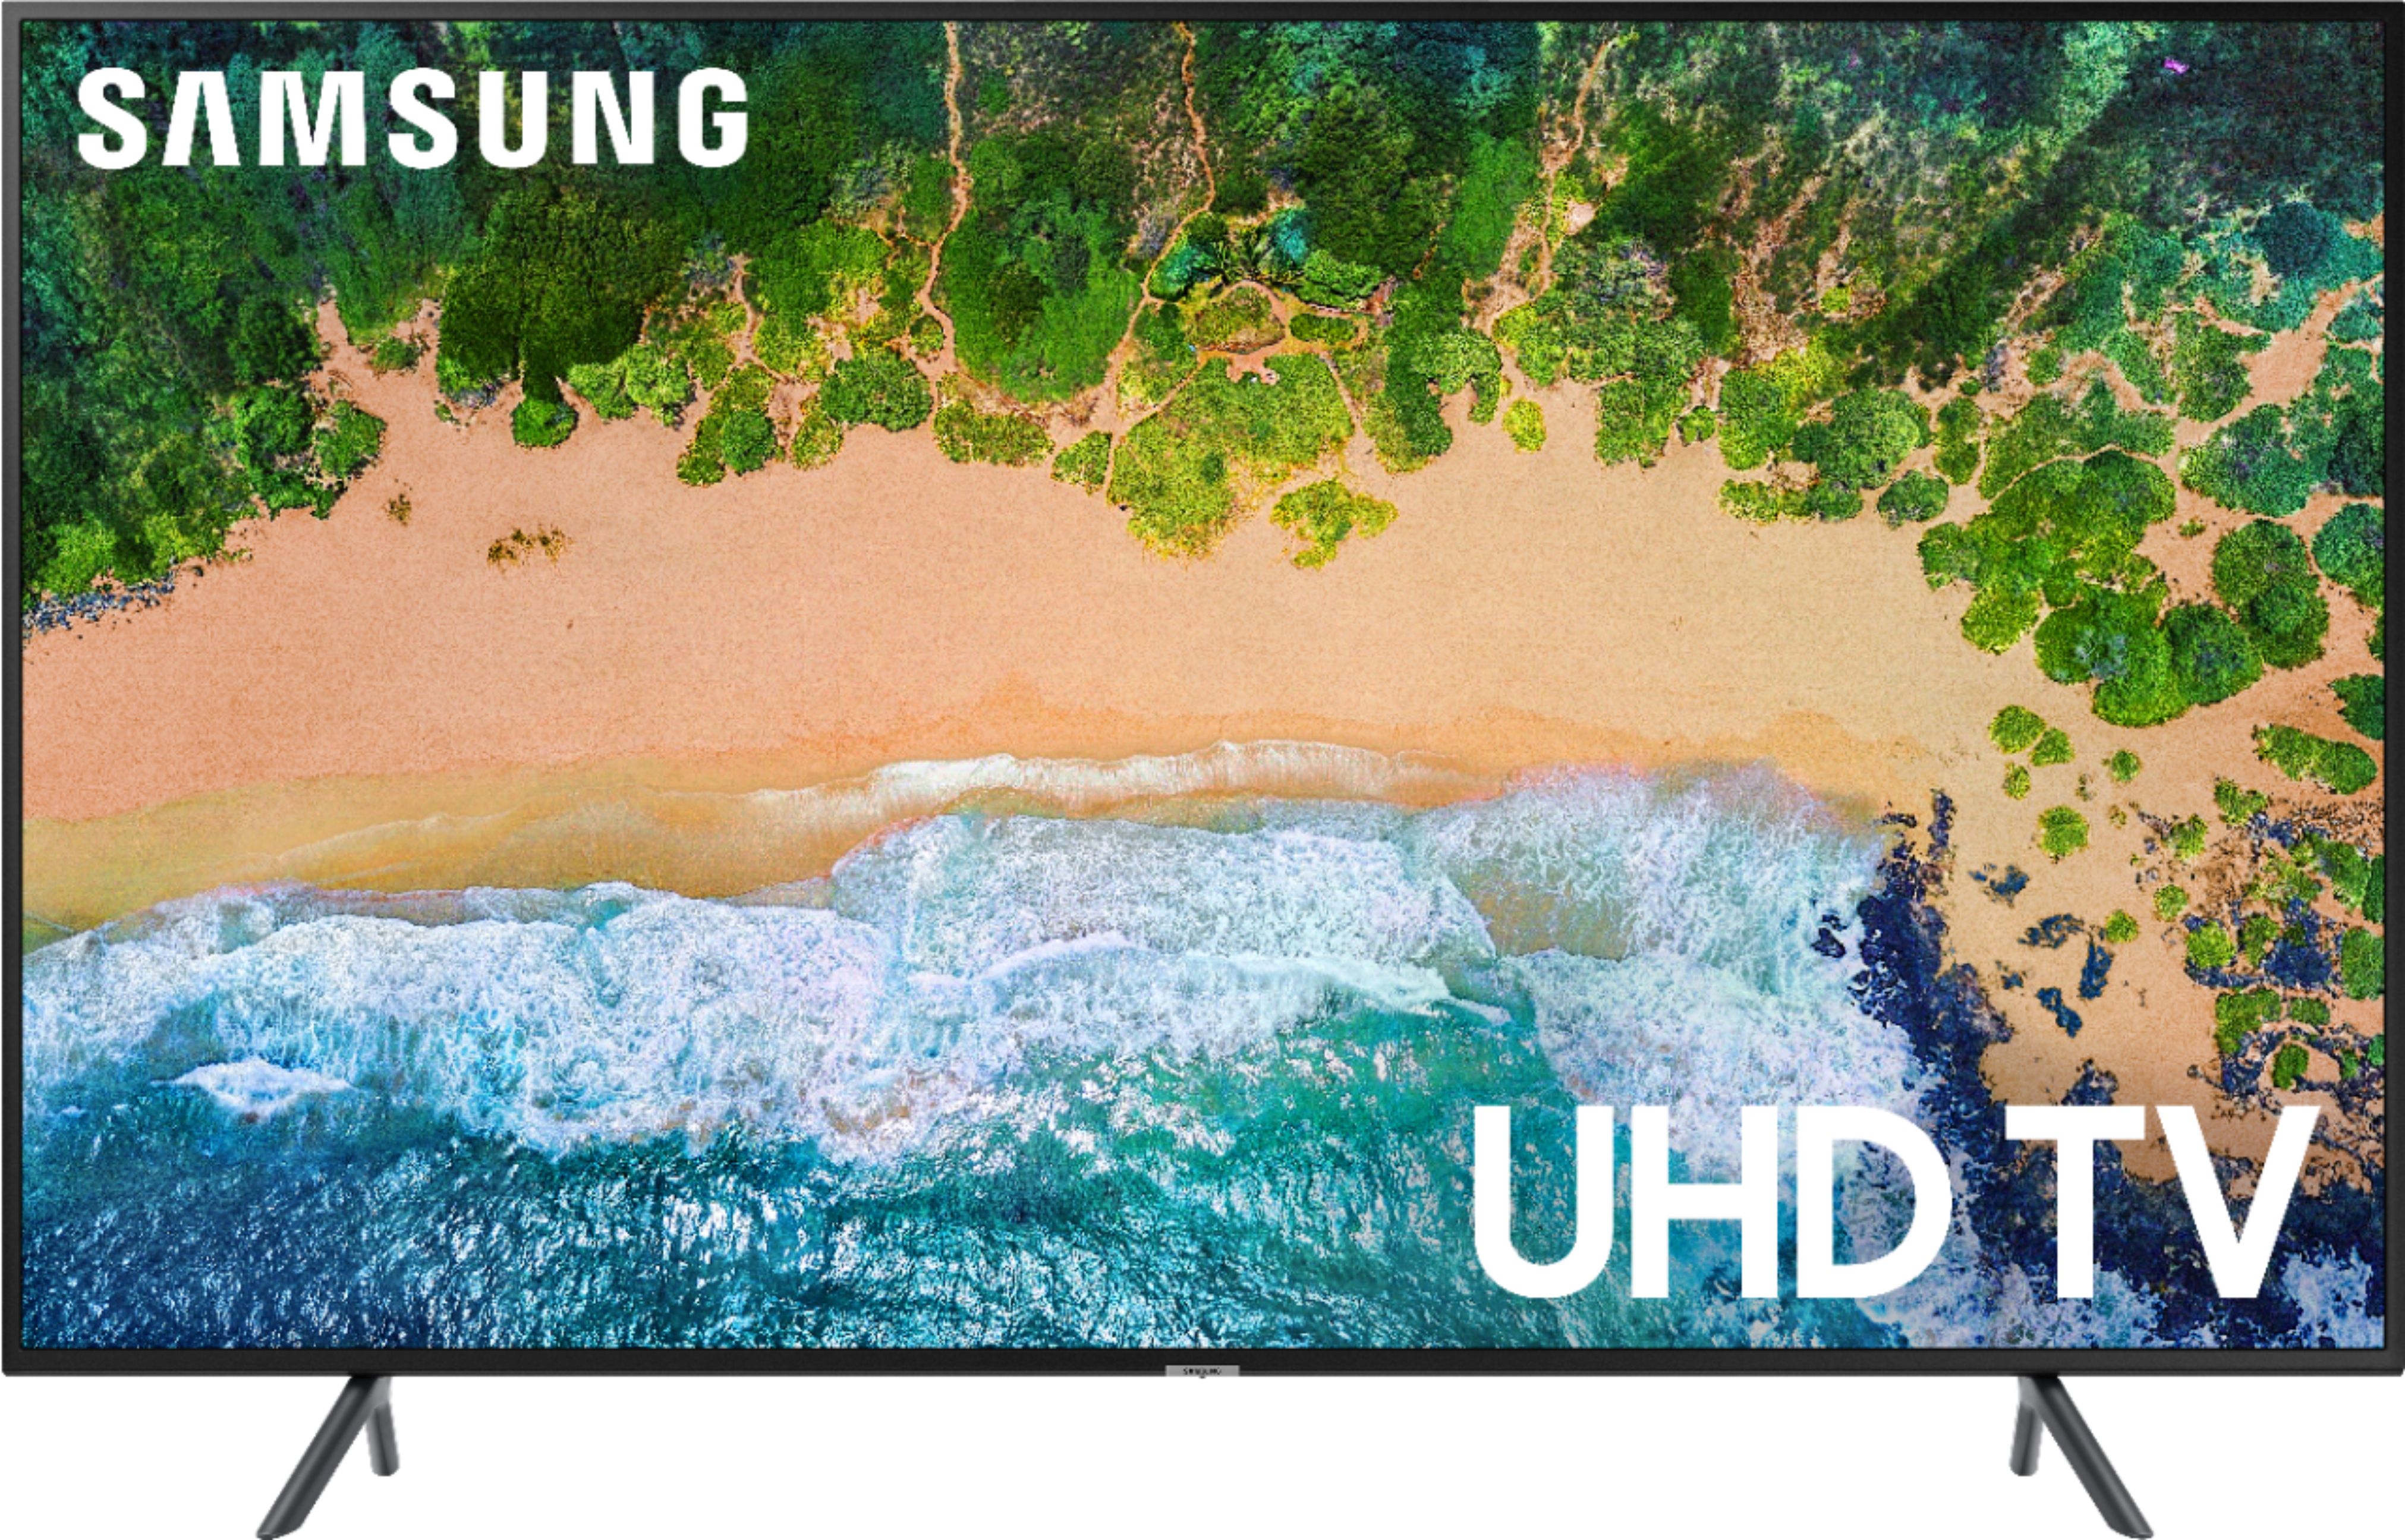 Samsung - 58" Class - LED - NU7100 Series - 2160p - Smart - 4K UHD TV with HDR